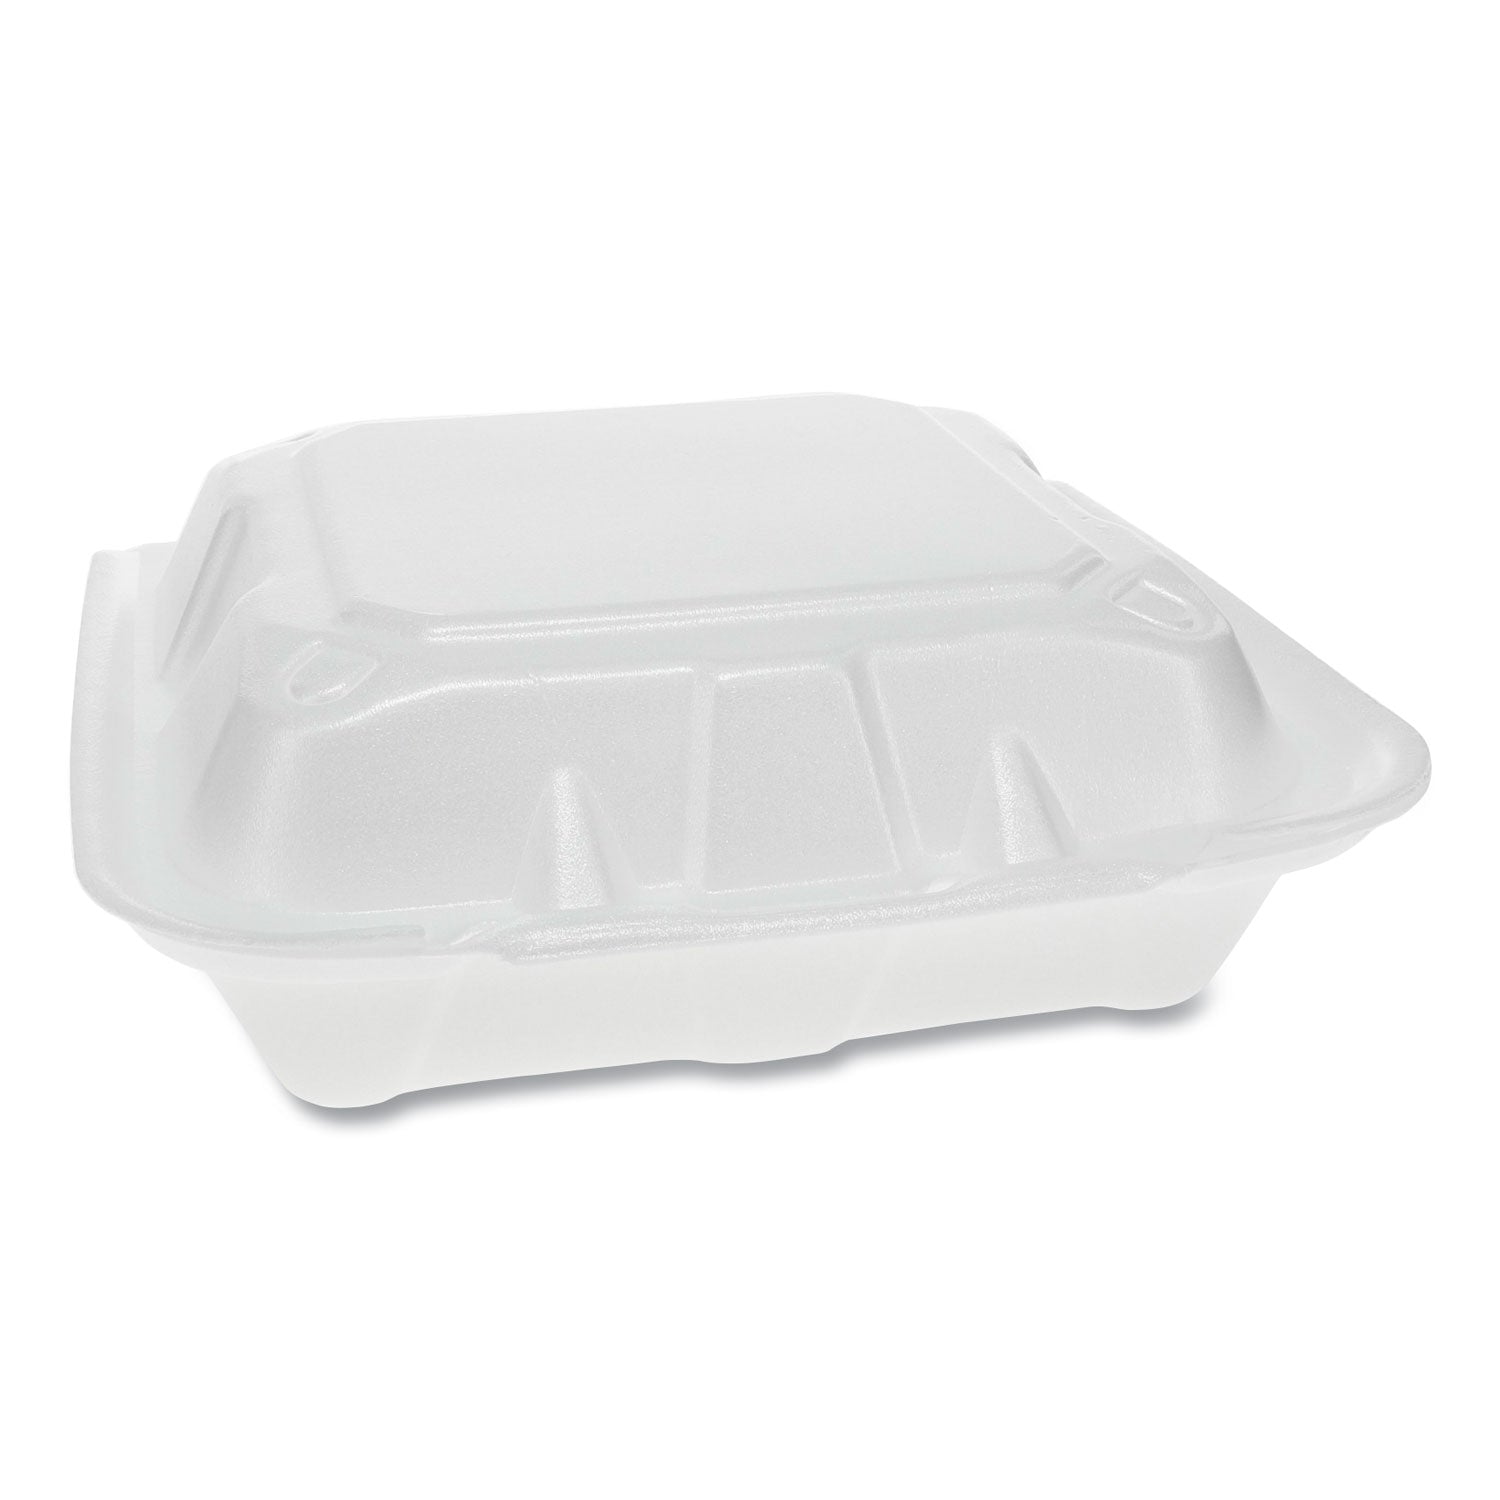 vented-foam-hinged-lid-container-dual-tab-lock-3-compartment-842-x-815-x-3-white-150-carton_pctytd188030000 - 1